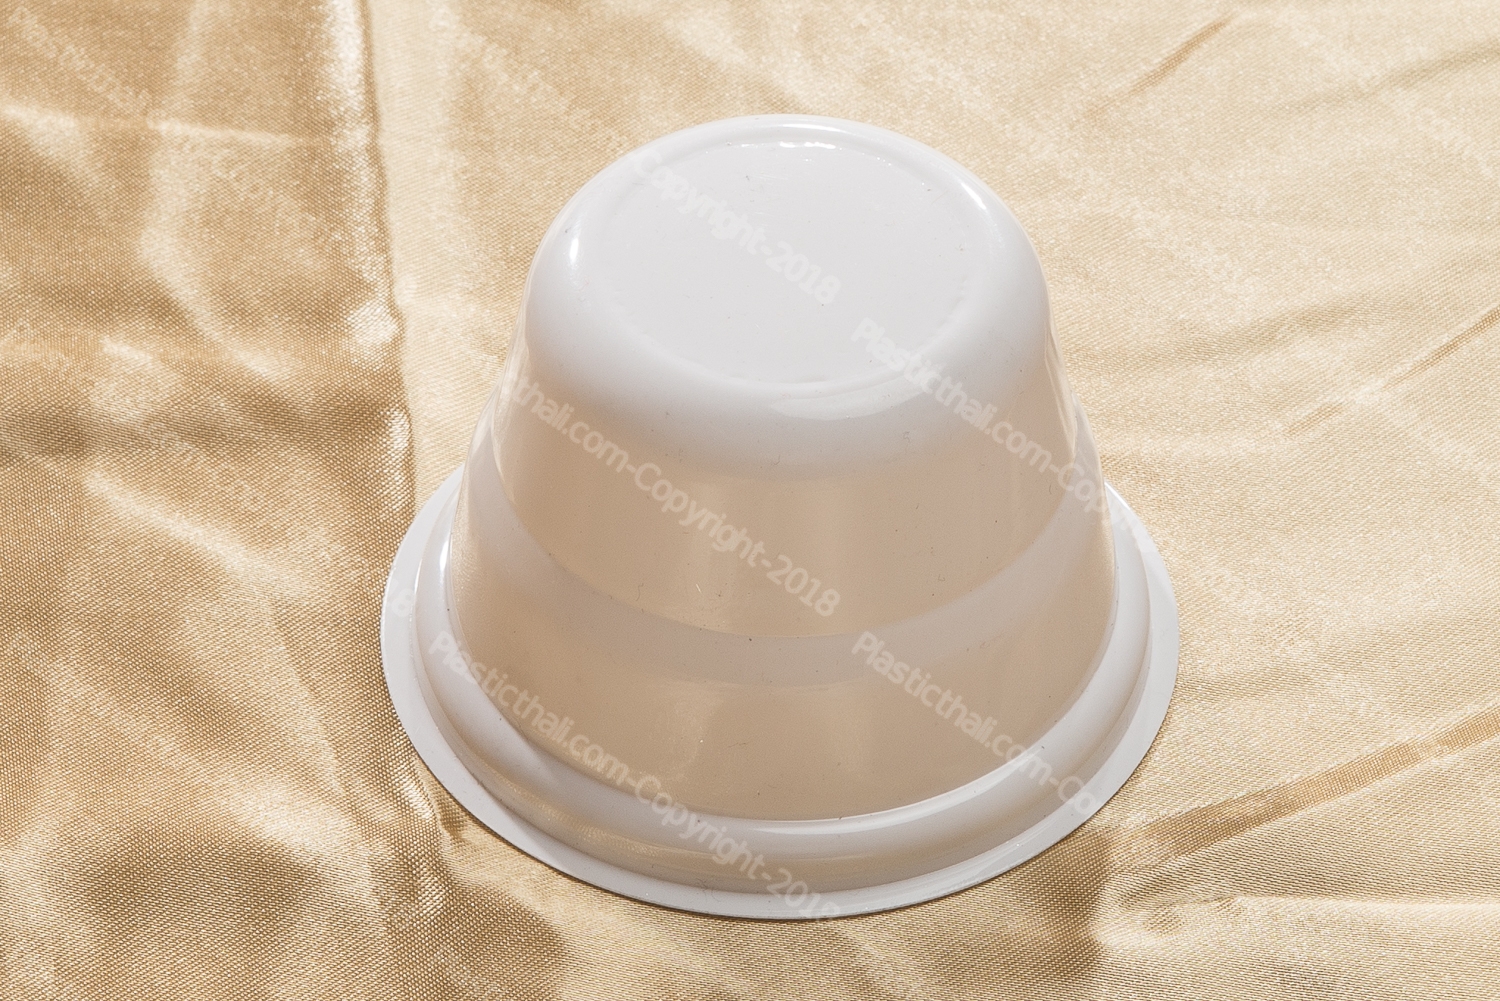 White 10 Compartment Plate -  - Virgin Plastic Thalis & Price  Match!